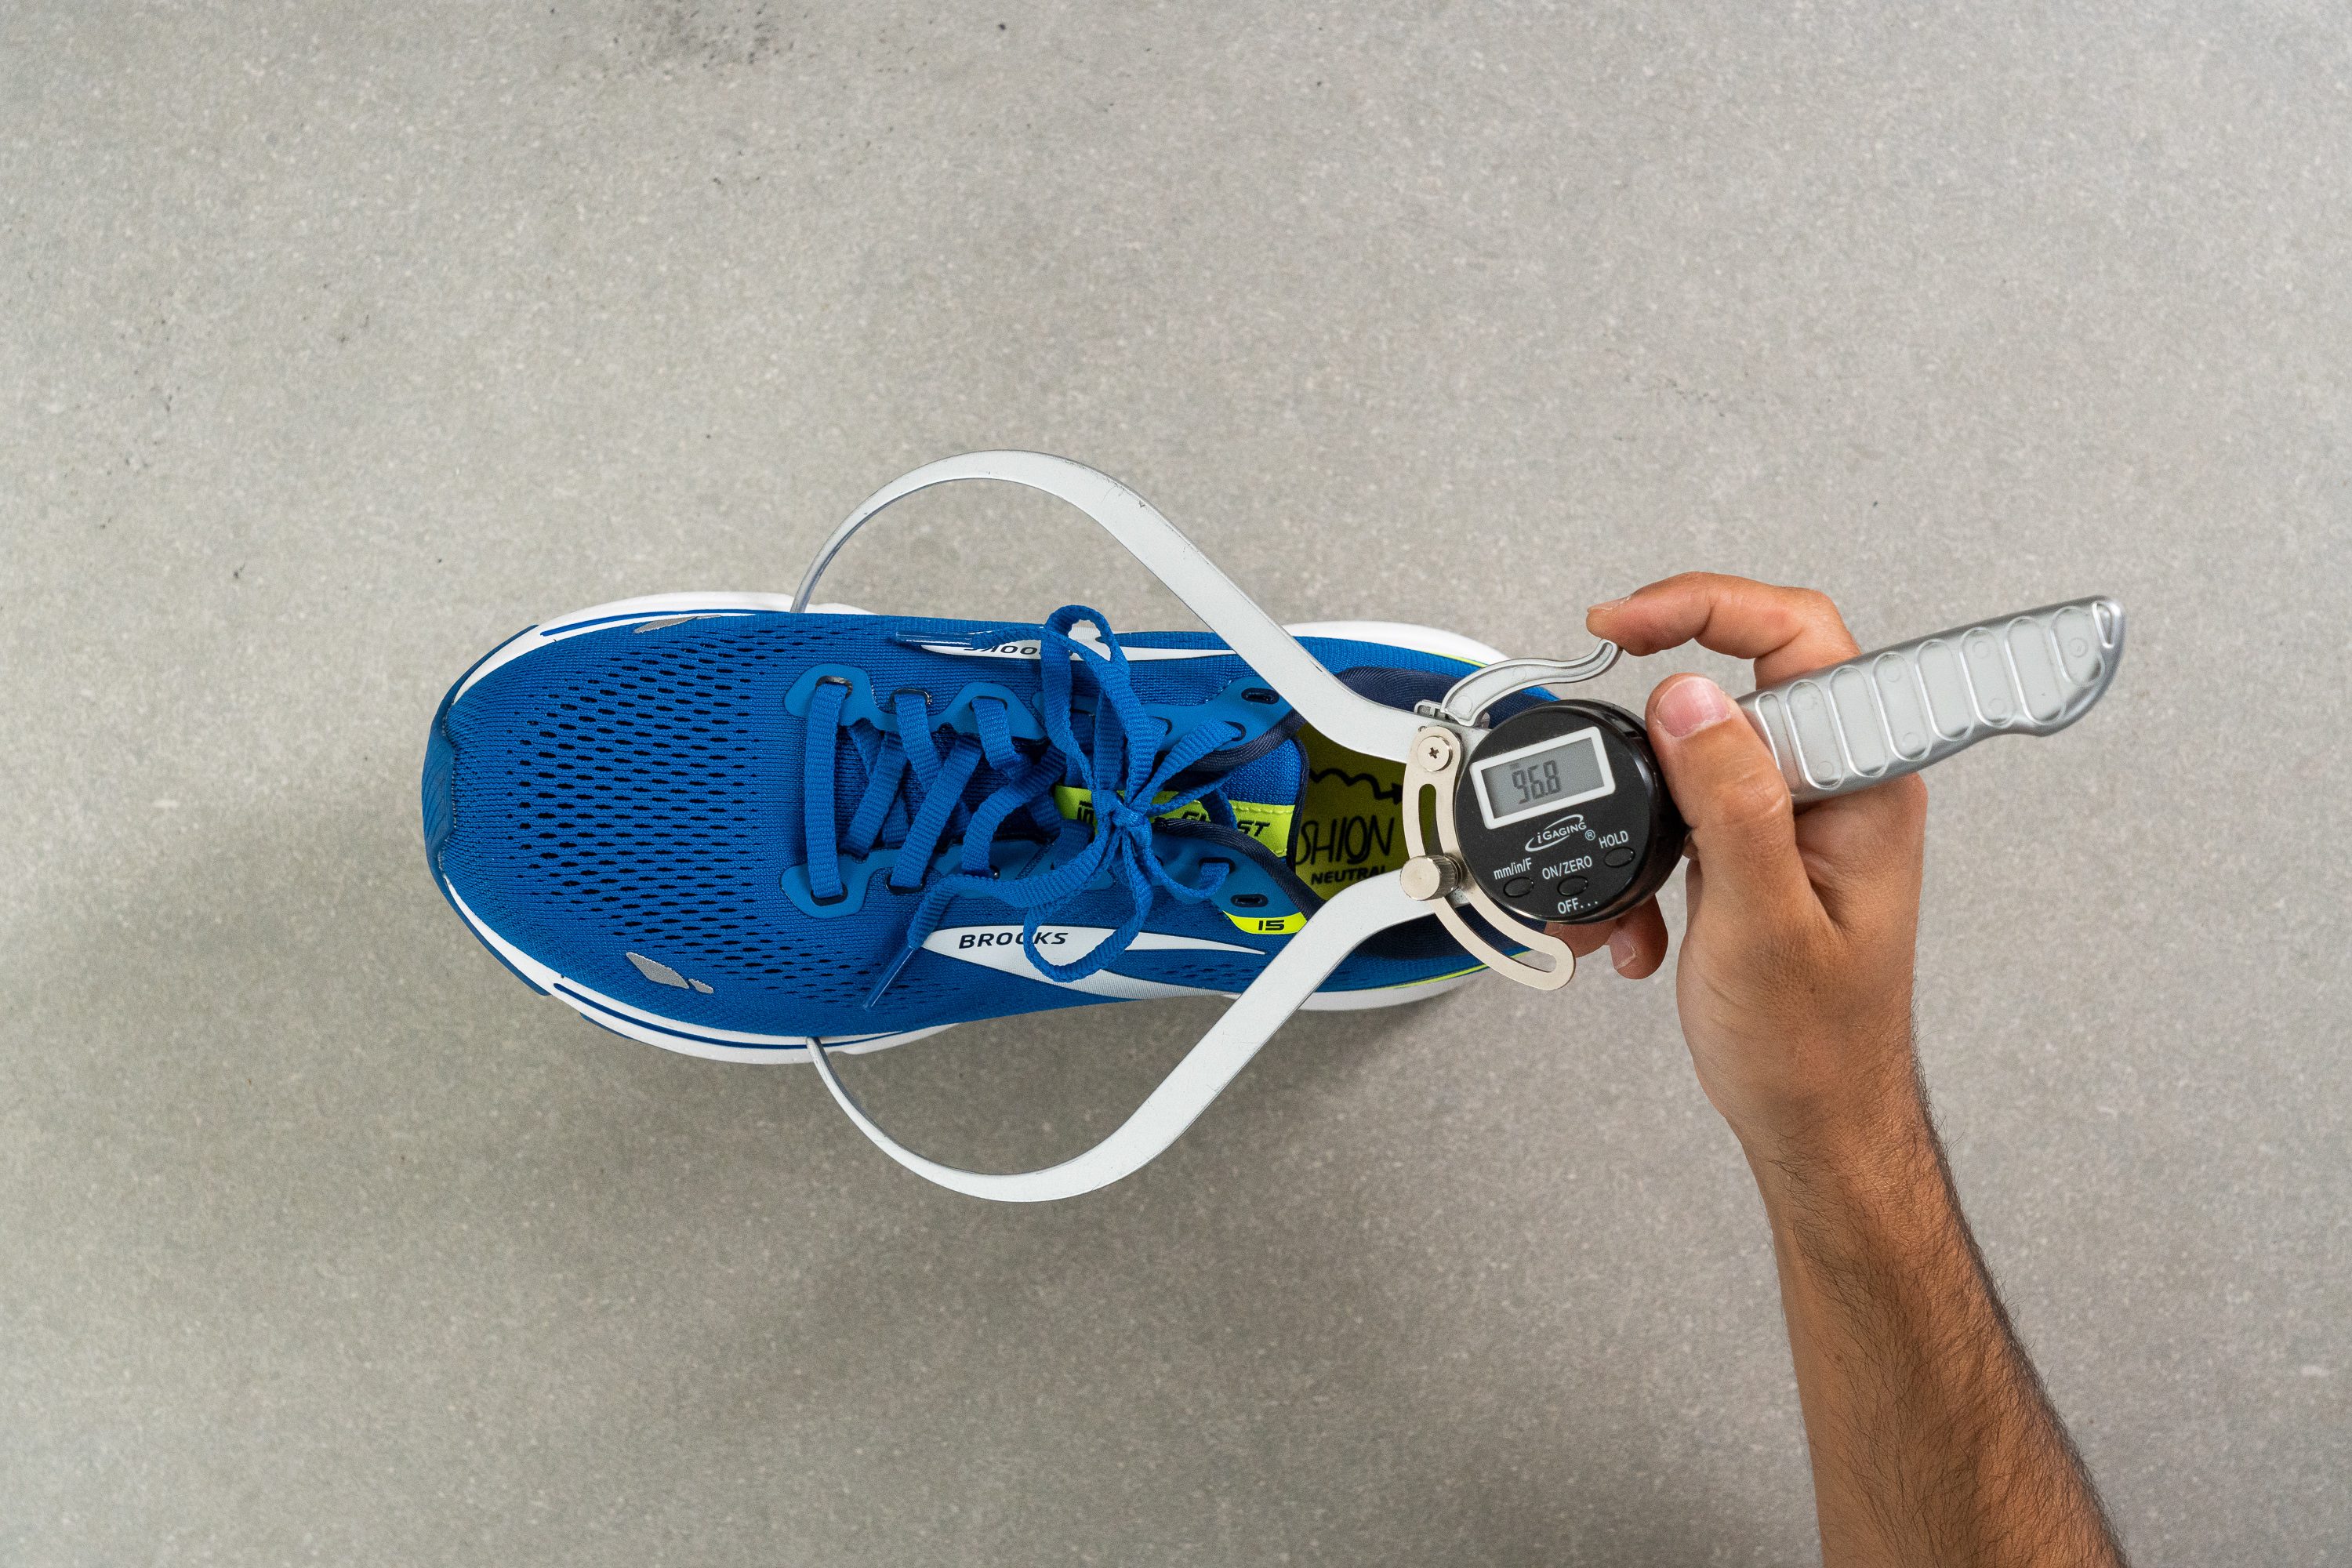 a Brooks stability shoe with the guide rails system Toebox width at the widest part